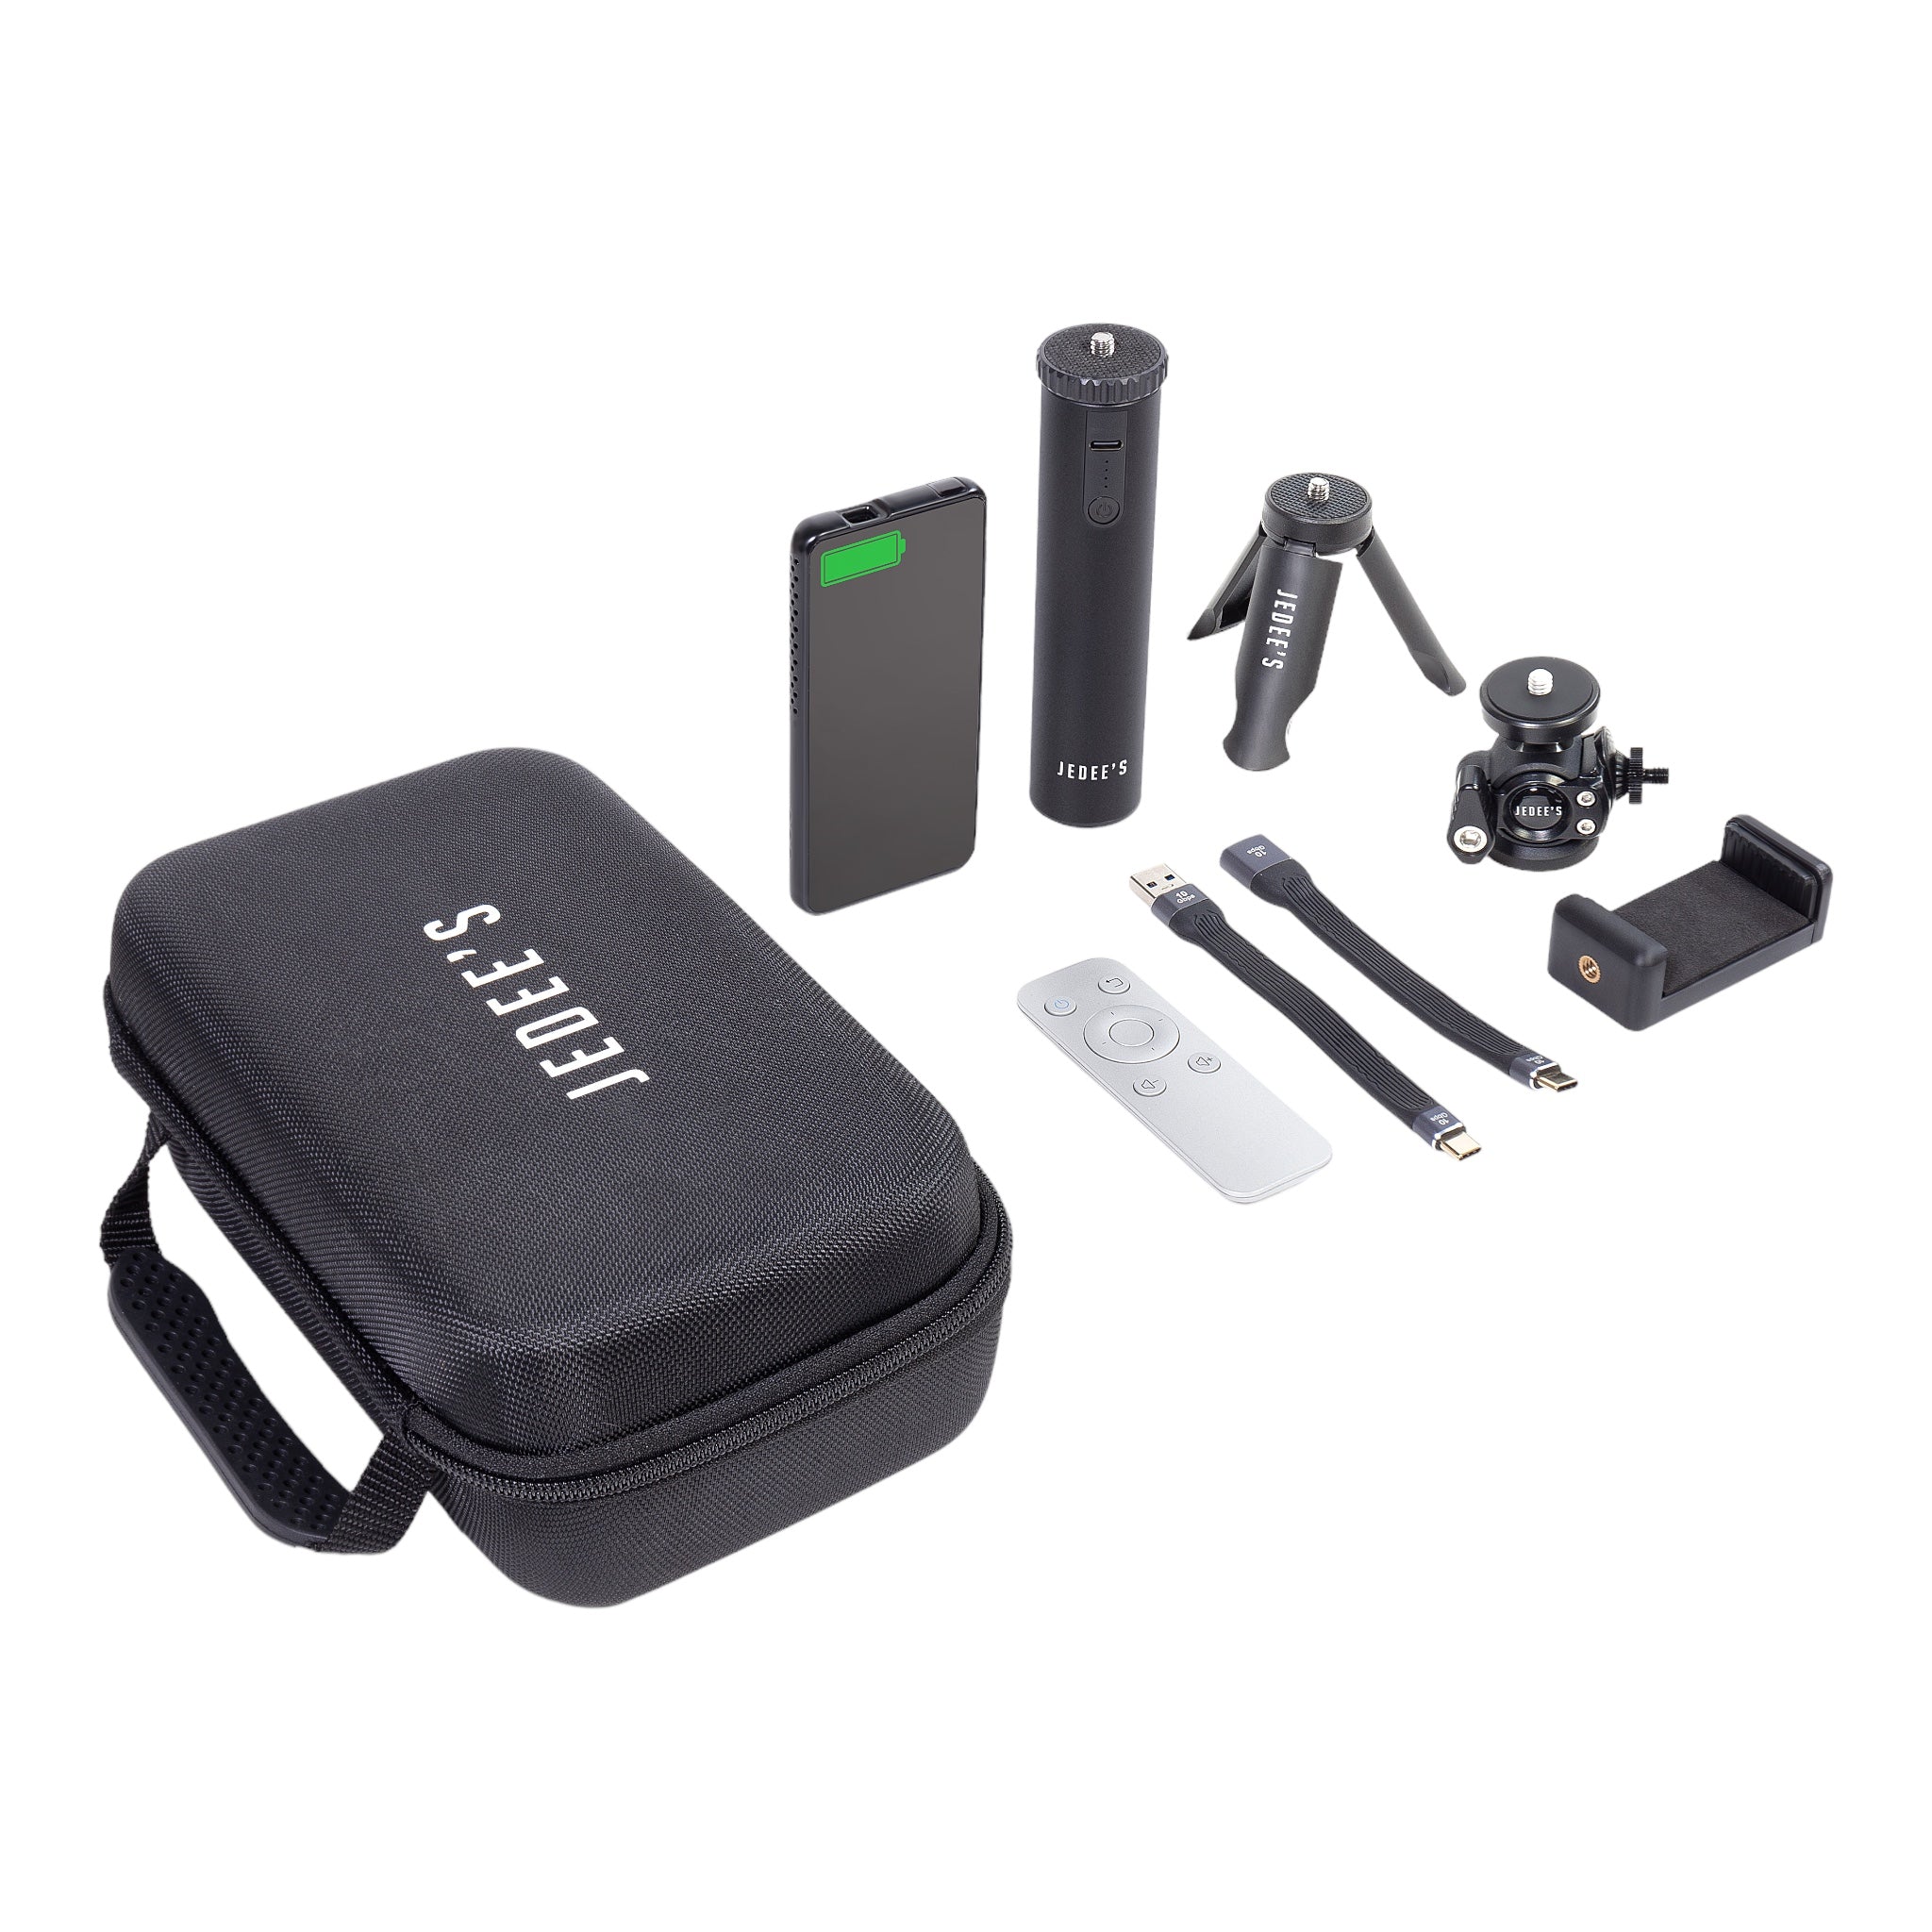 Portable Video Projector | Jedee's Black Card HD Box [Tripod with Free 6000mah Battery]